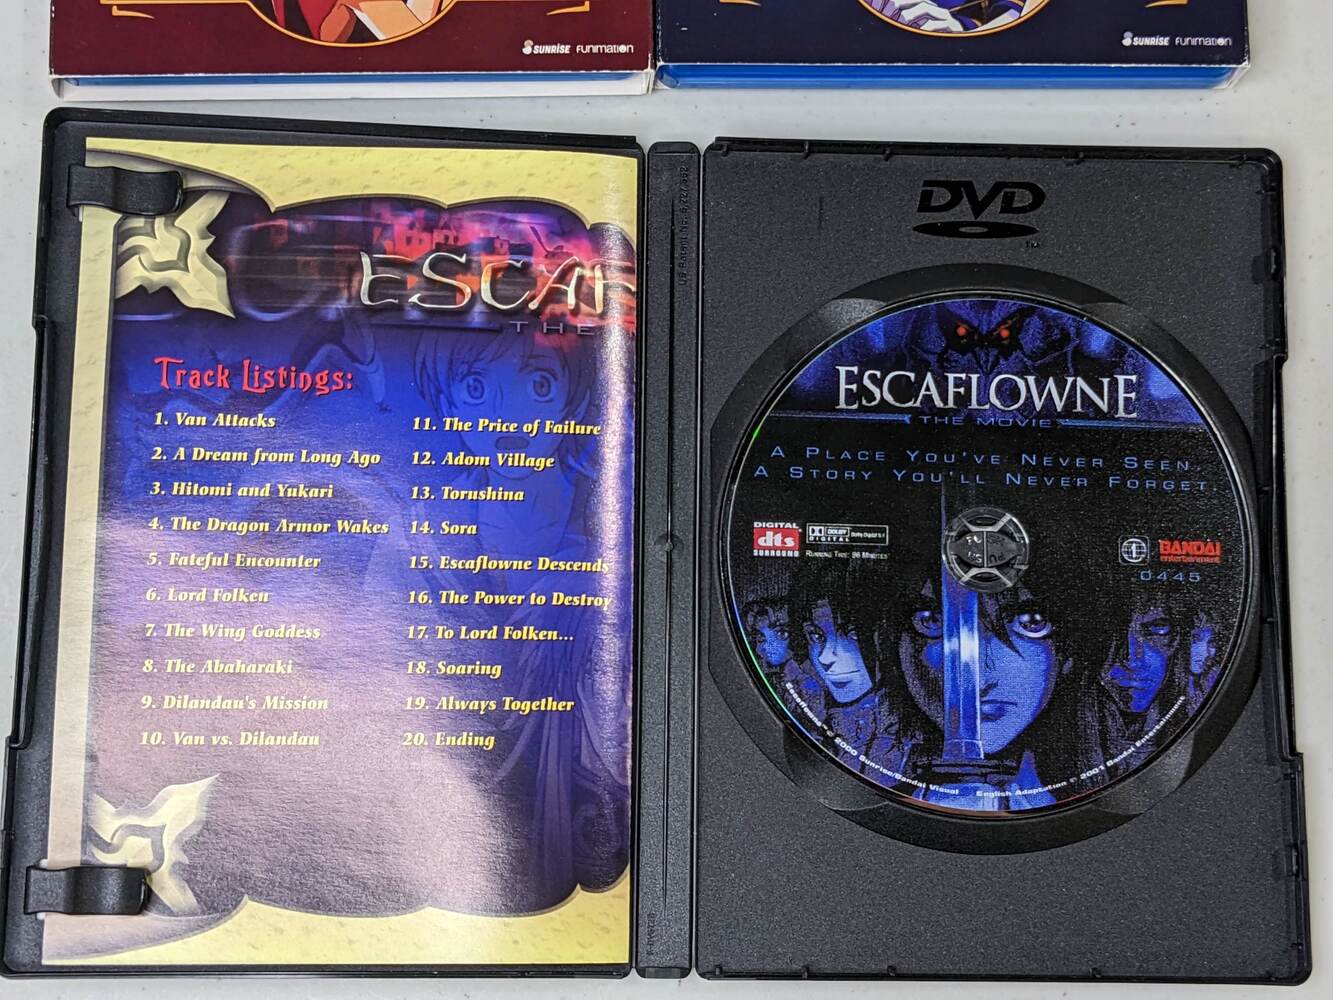 The Vision of Escaflowne: Part One Two (Blu-ray + DVD) Anime Funimation + Movie